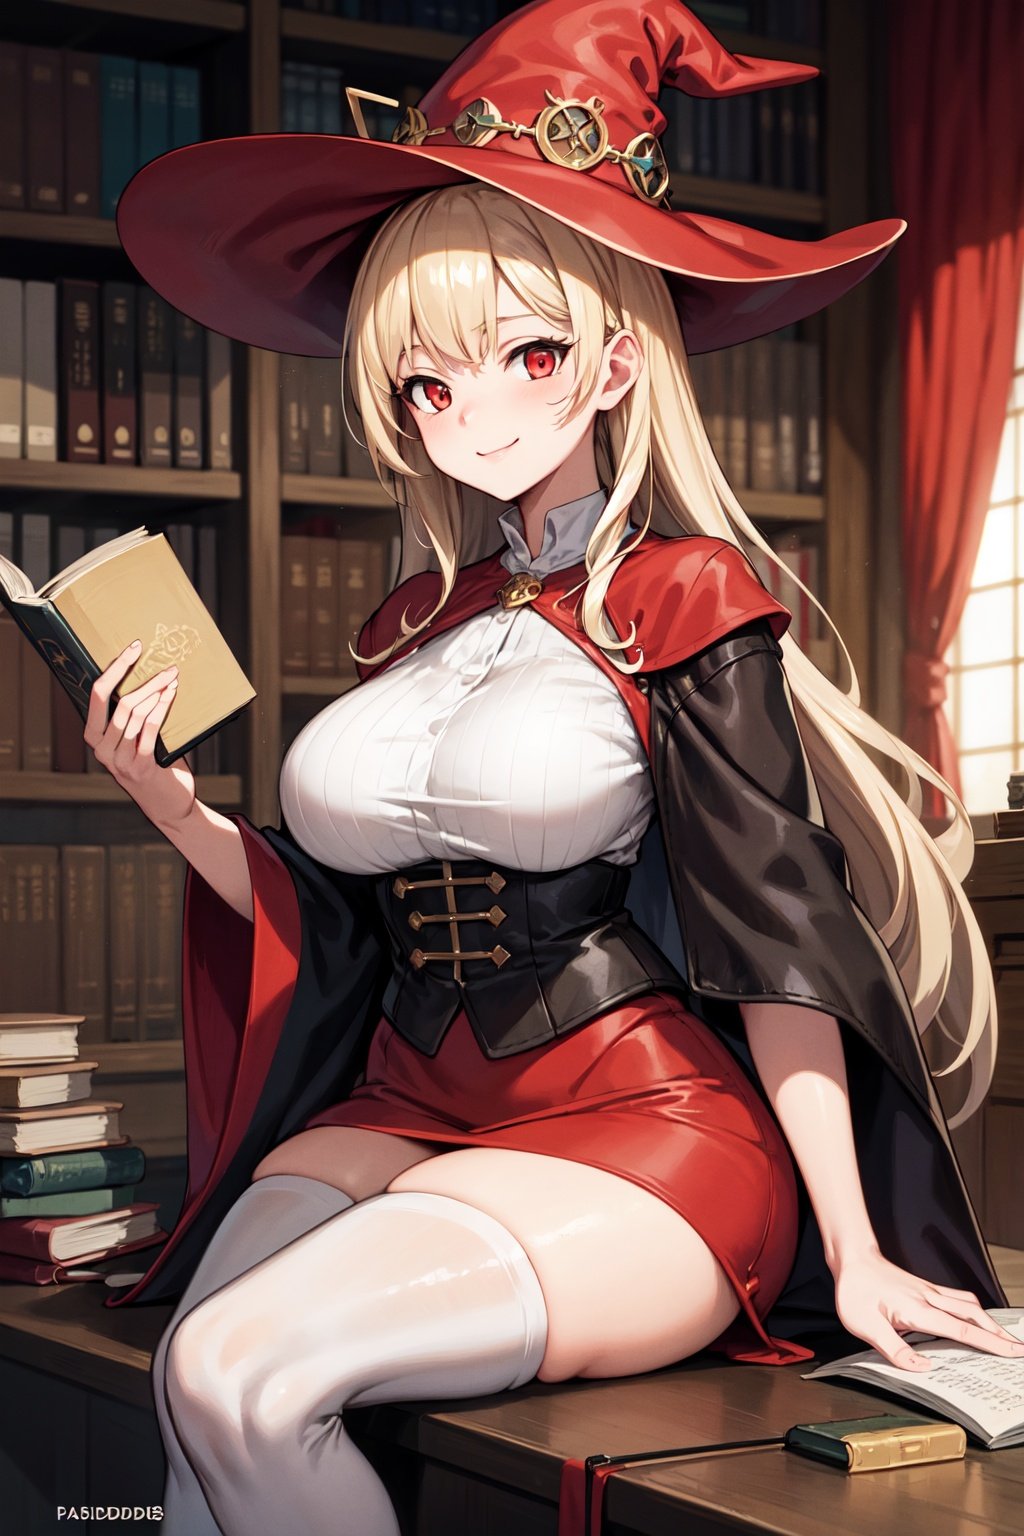 masterpiece, best quality, ultra-detailed, HDR, absudres:1.3, illustration, 2d,

A girl in the library holding a book, sitting, blonde hair, medieval outfit, red_witch_hat, sweet smile, large breasts, curvy, red_eyes